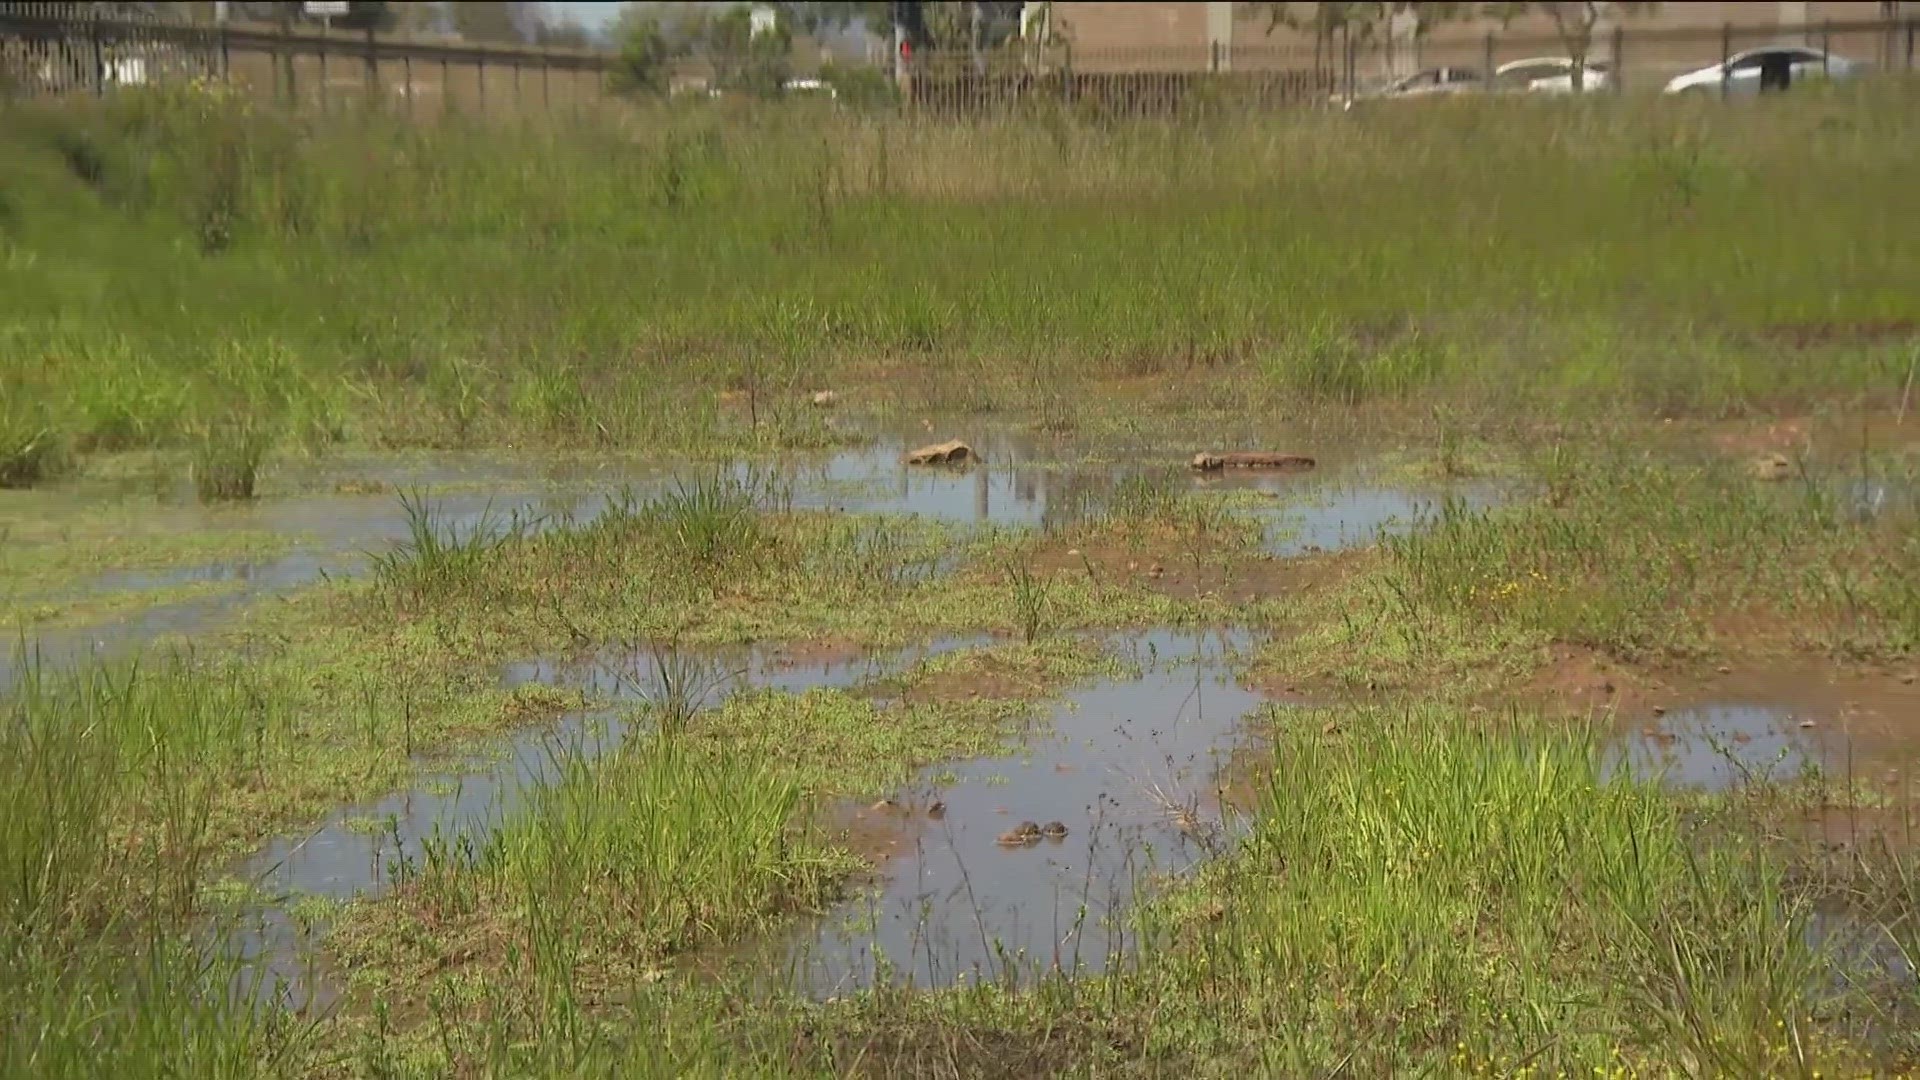 Vernal pools occur after the winter rains on what's left of the undeveloped mesas across San Diego County.